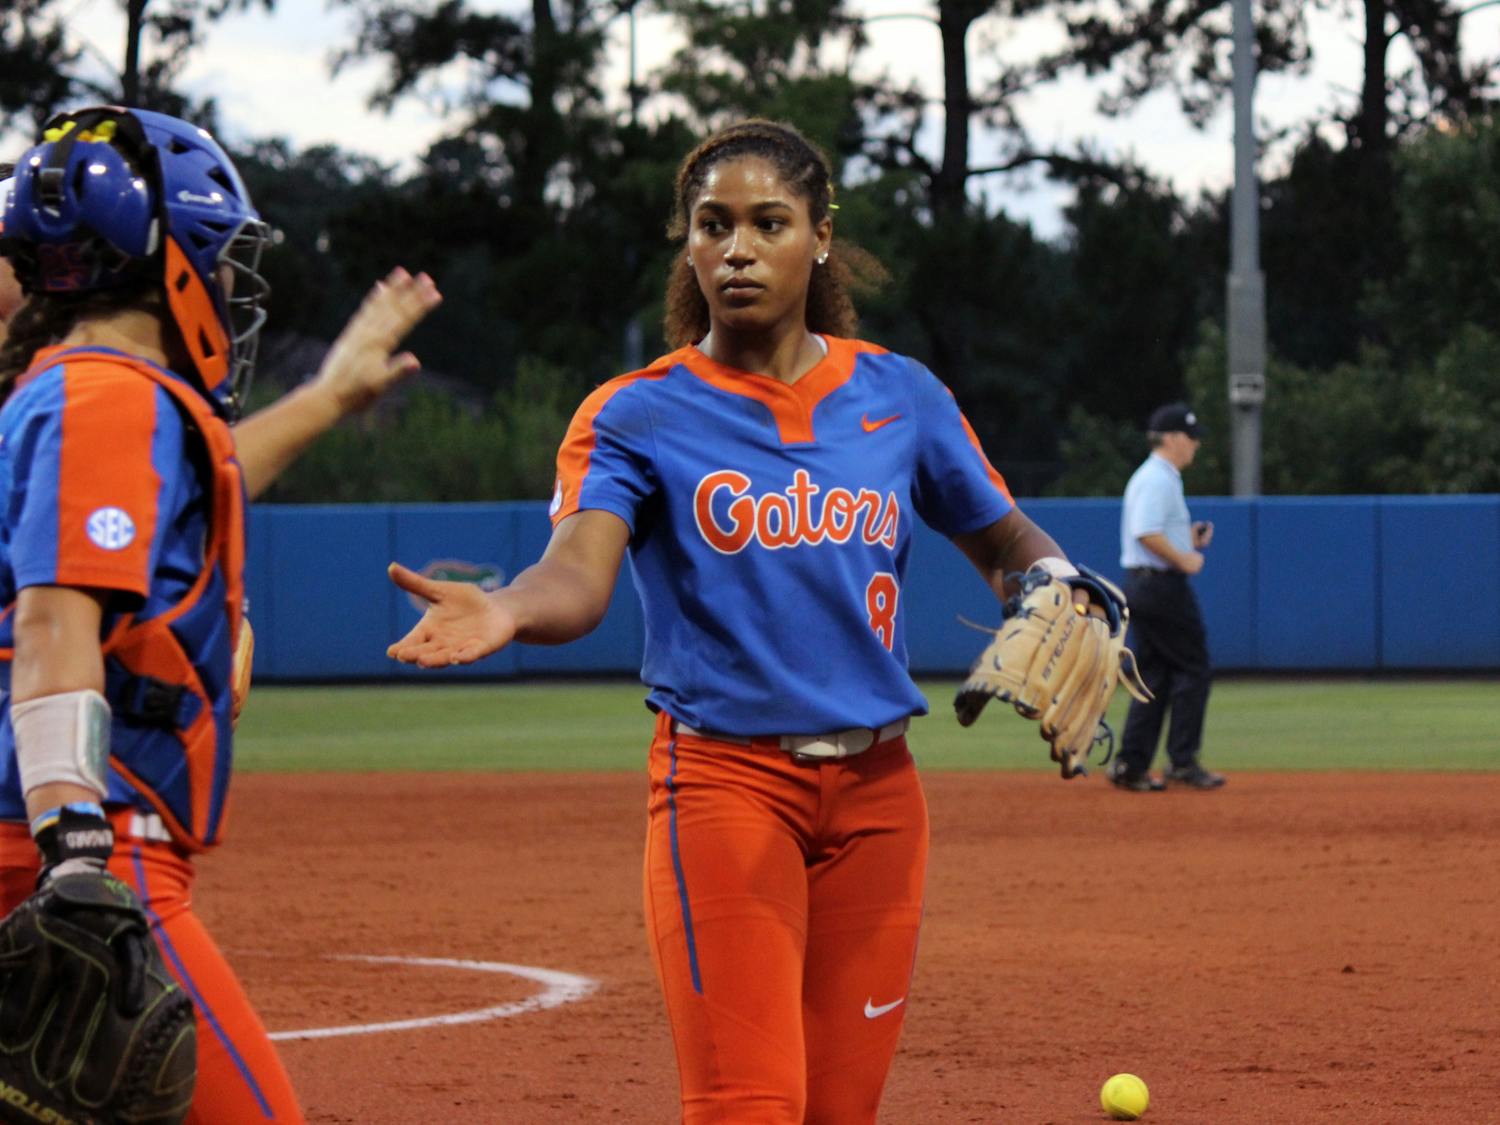 Senior pitcher Aleshia Ocasio threw her final outing for the Gators in their 2-0 lost to Oklahoma at the Women's College World Series. Ocasio and starter Kelly Barnhill combined for only three hits, but their efforts weren't enough to save UF's season. 